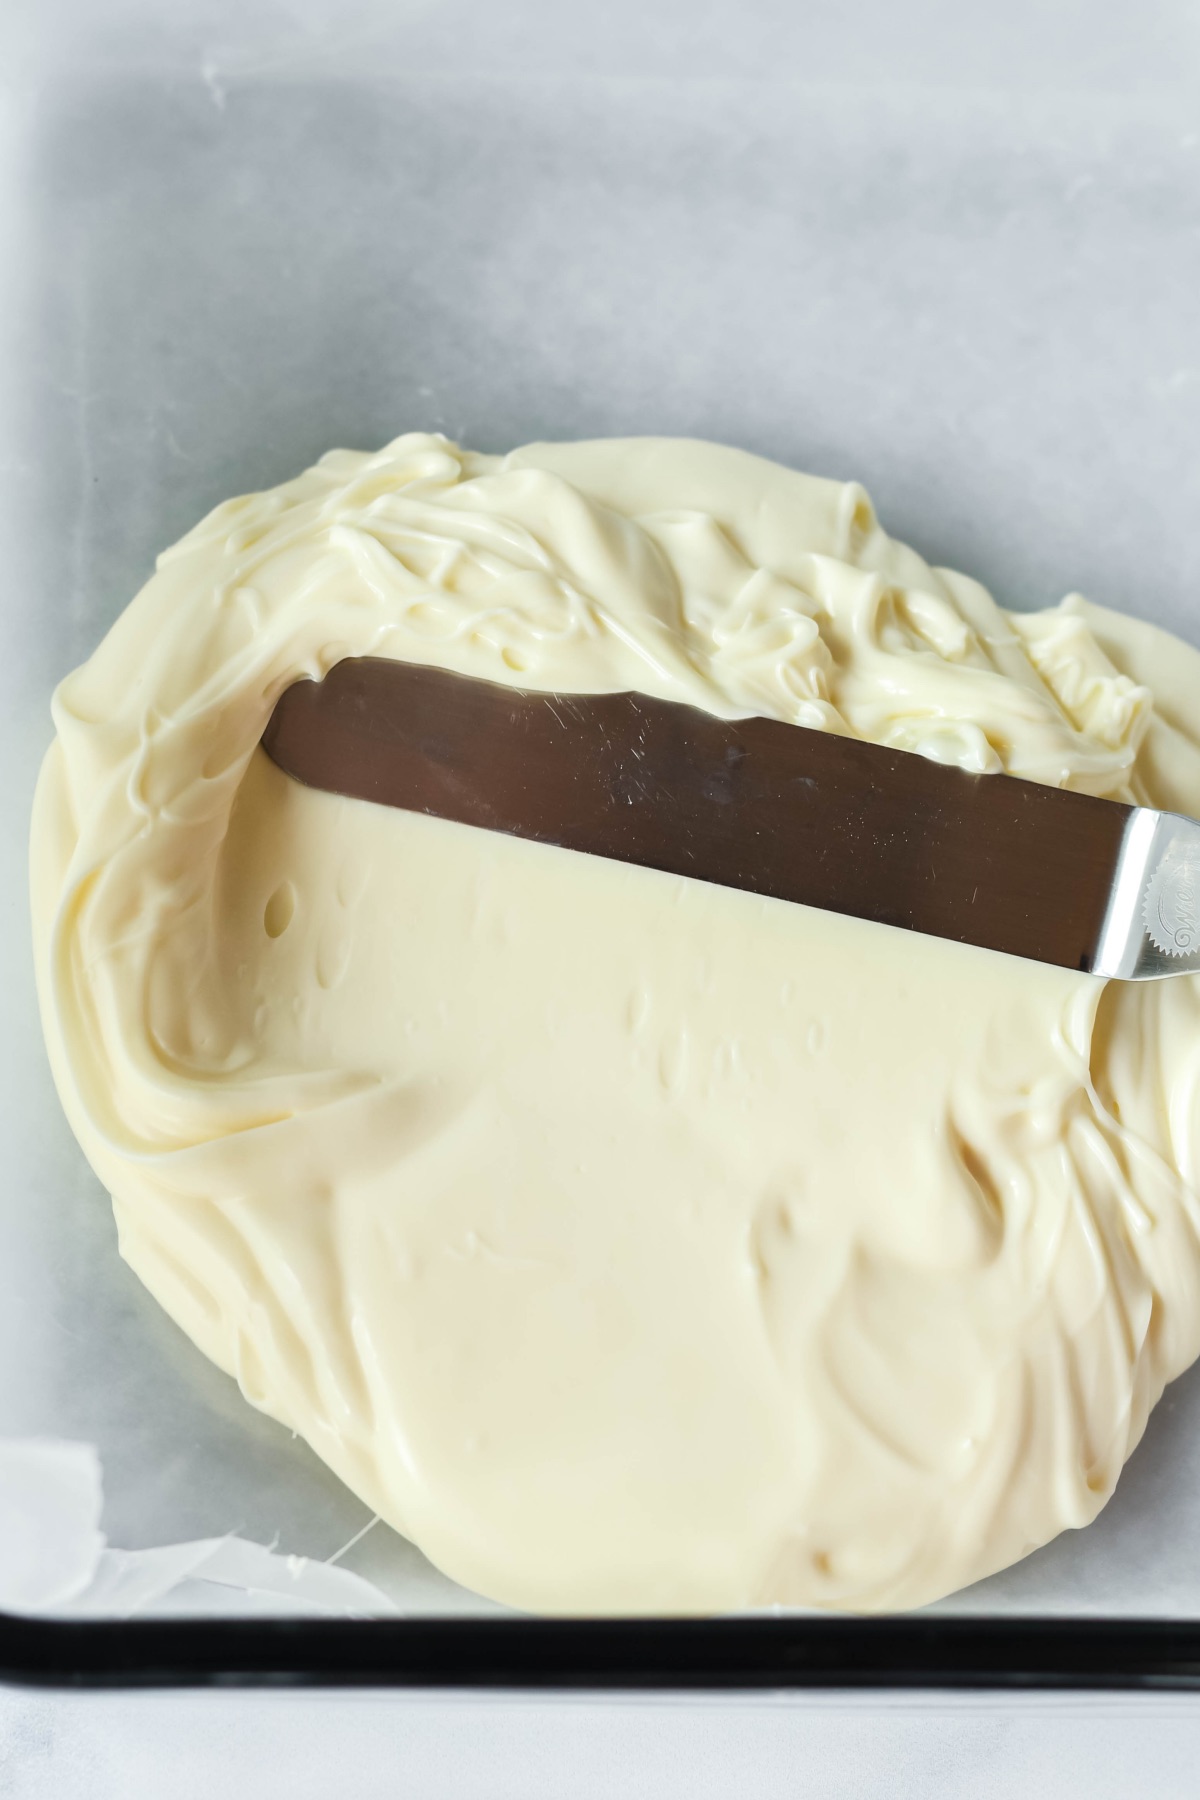 spread the white chocolate into a pan